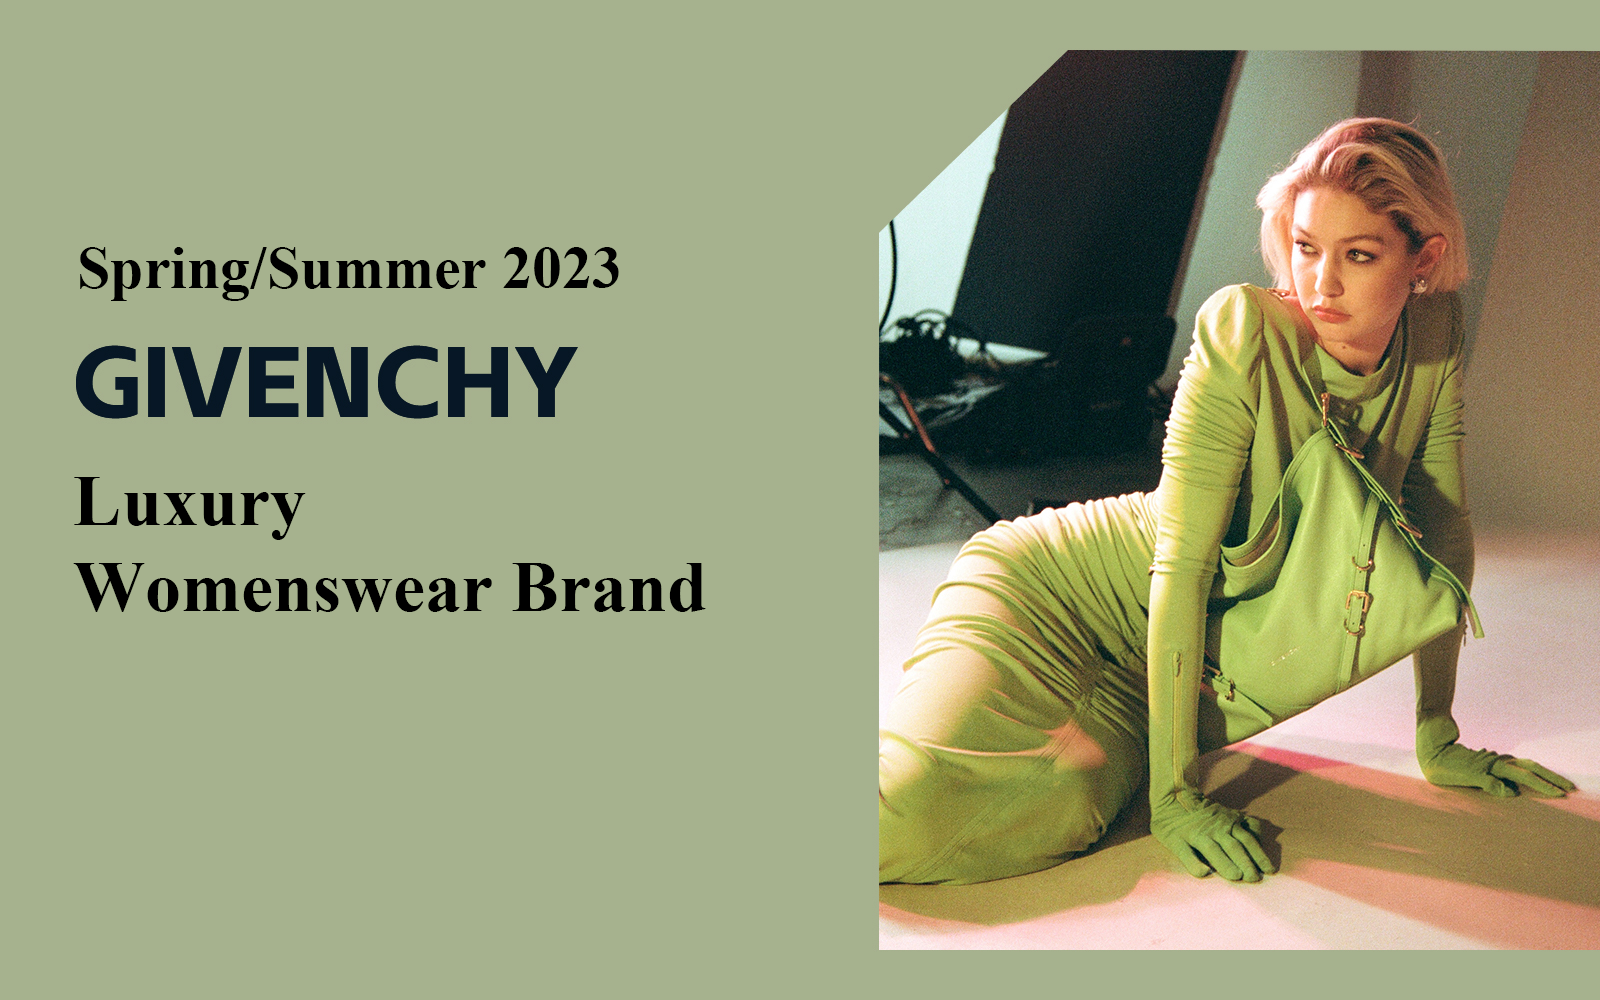 The Analysis of Givenchy The Luxury Womenswear Brand